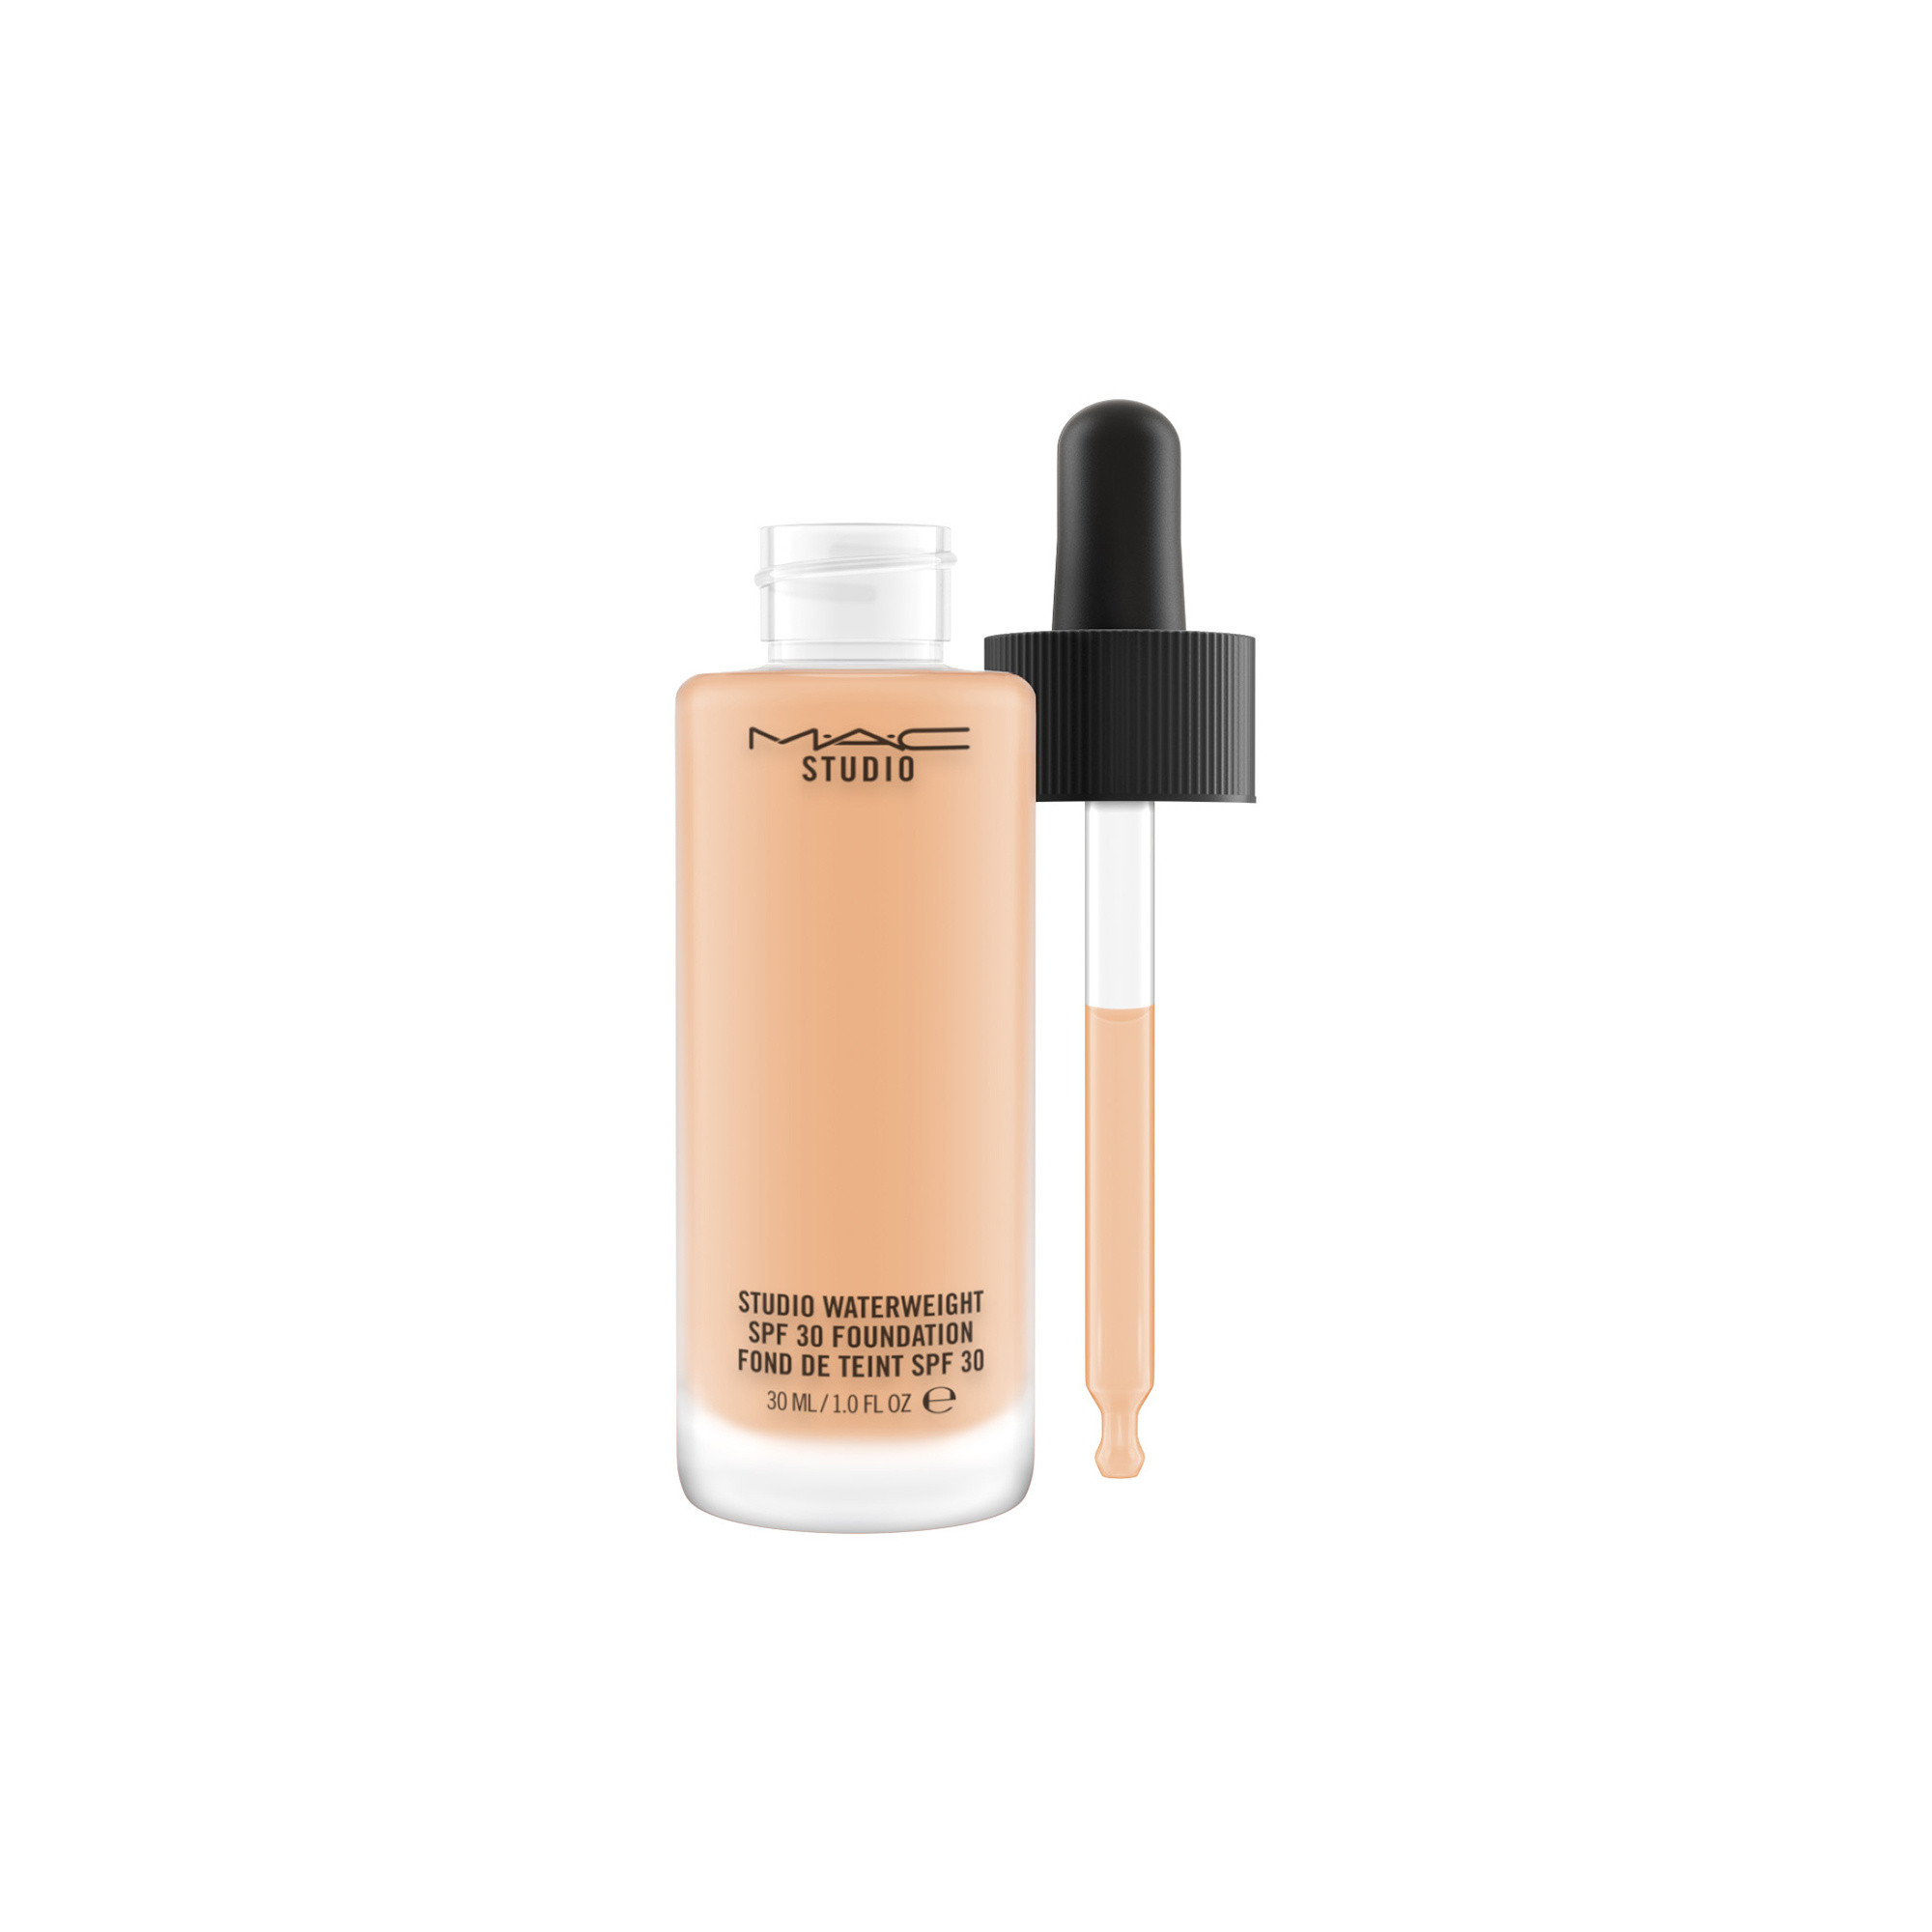 Studio Waterweight Foundation Spf30 - NC30, NC30, large image number 1